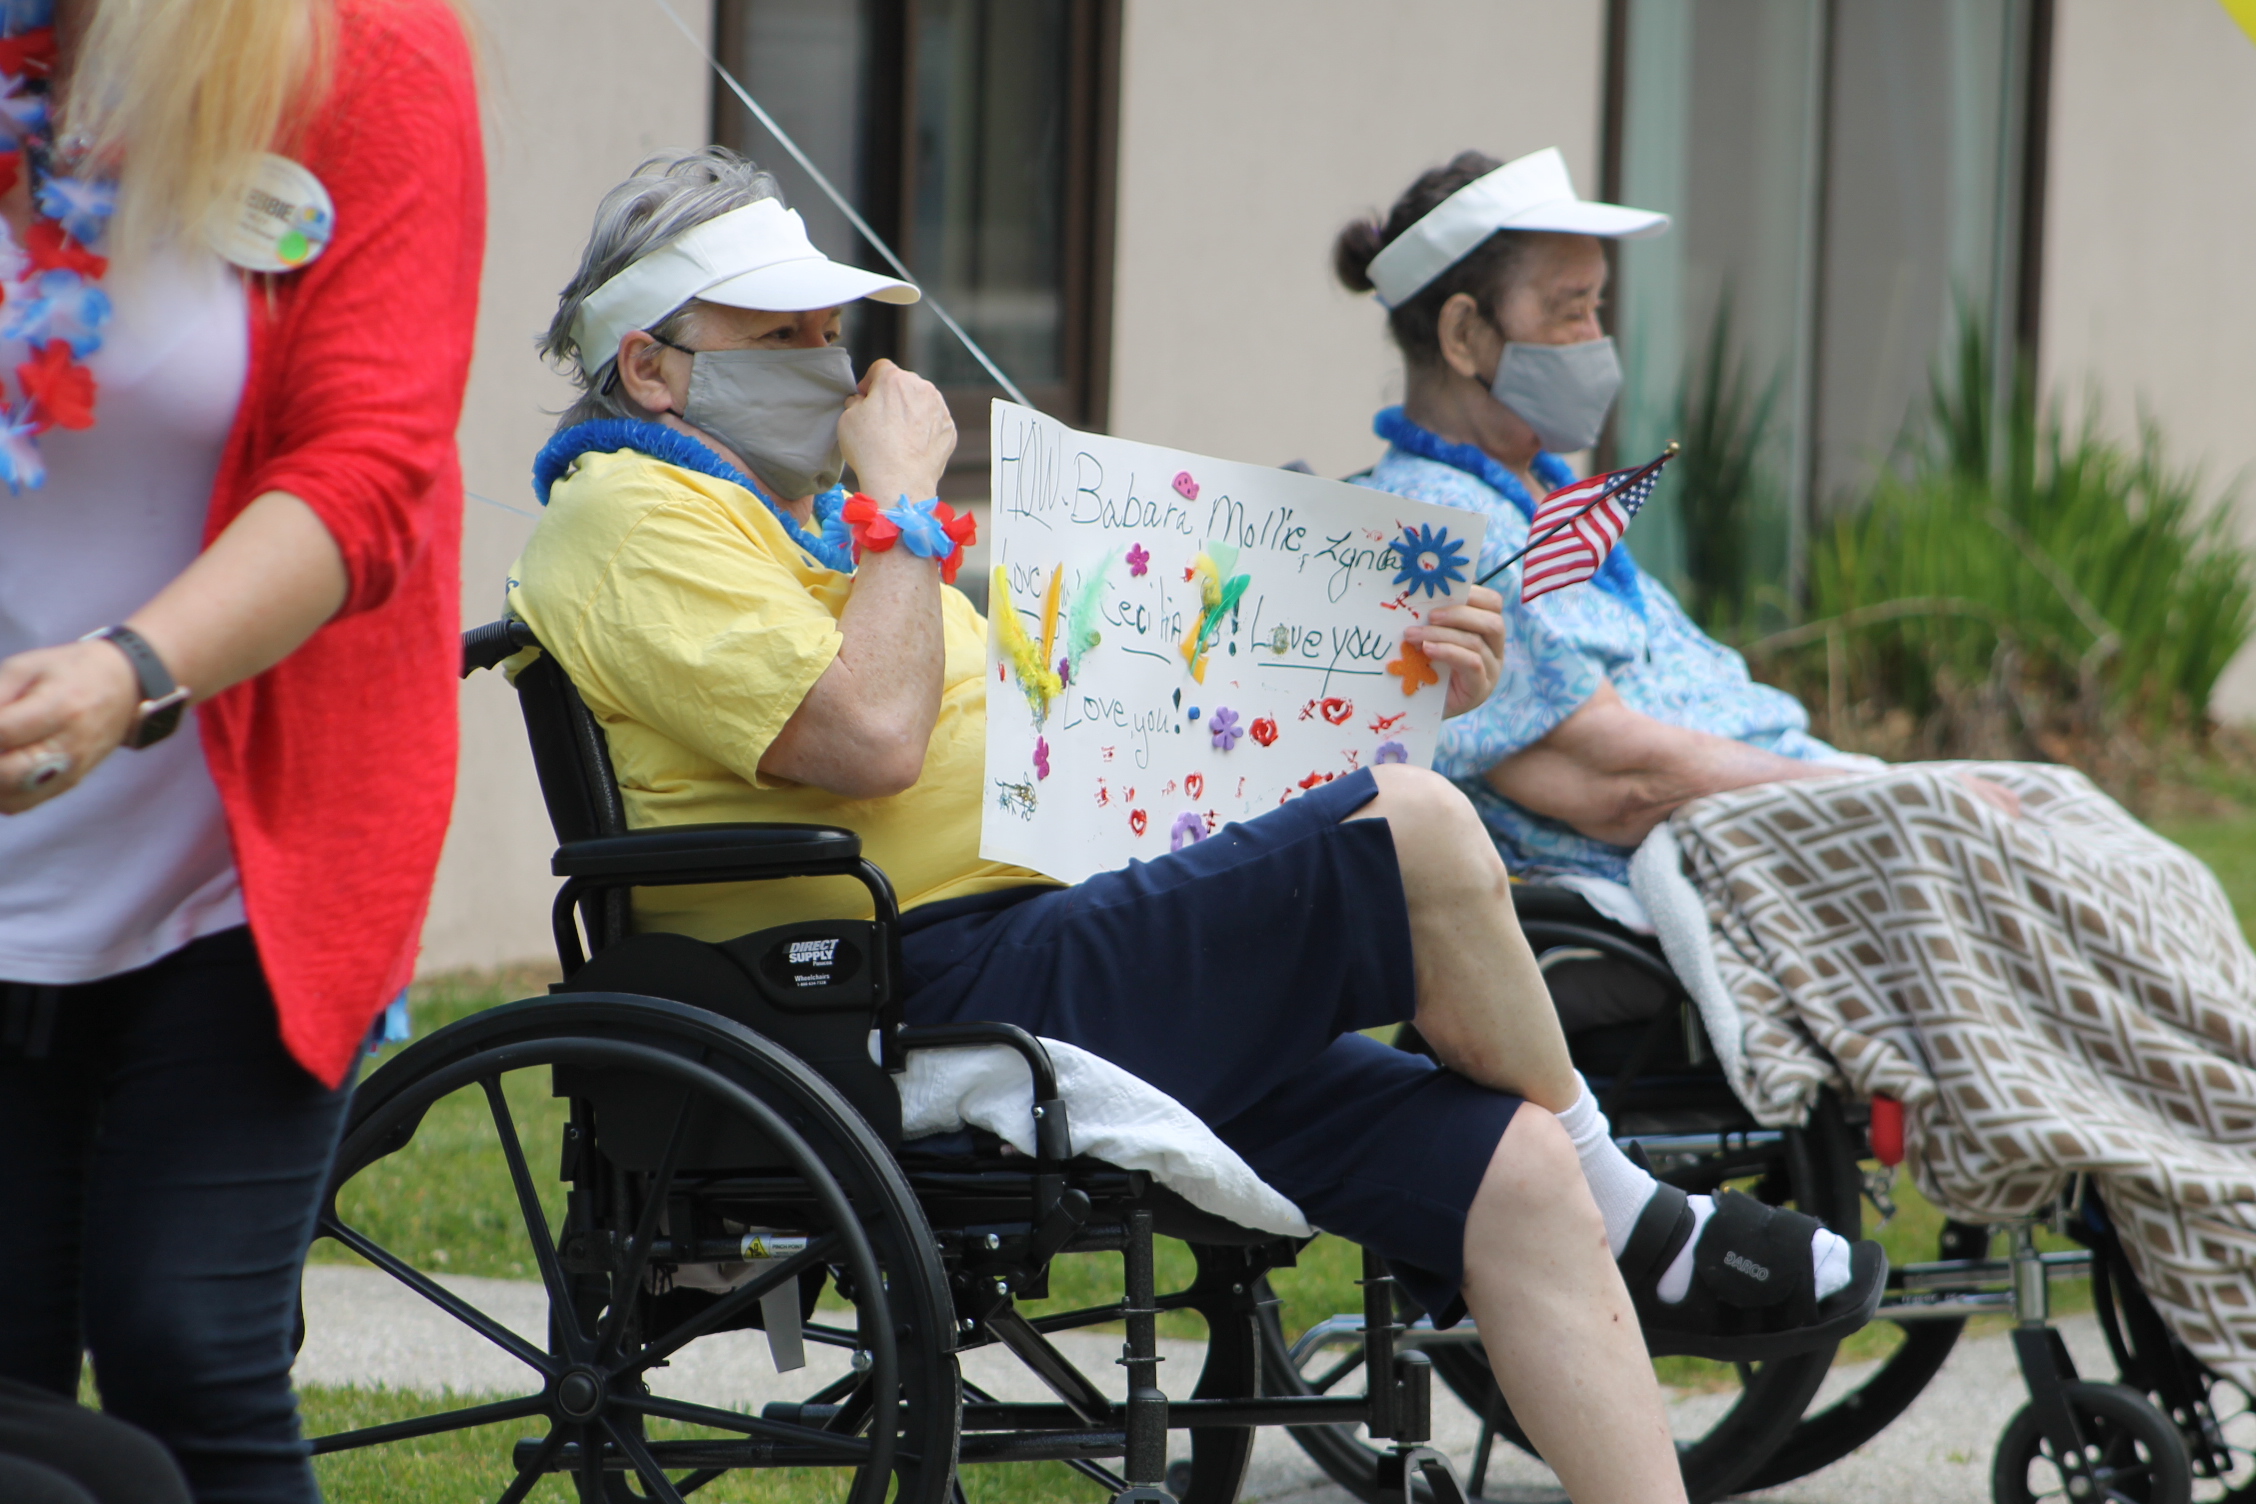 A Brian Center Resident enjoys the parade along with a hand-made sign with names of family members and the words "Love you." (Photos by Juliana Walker/MNJ)